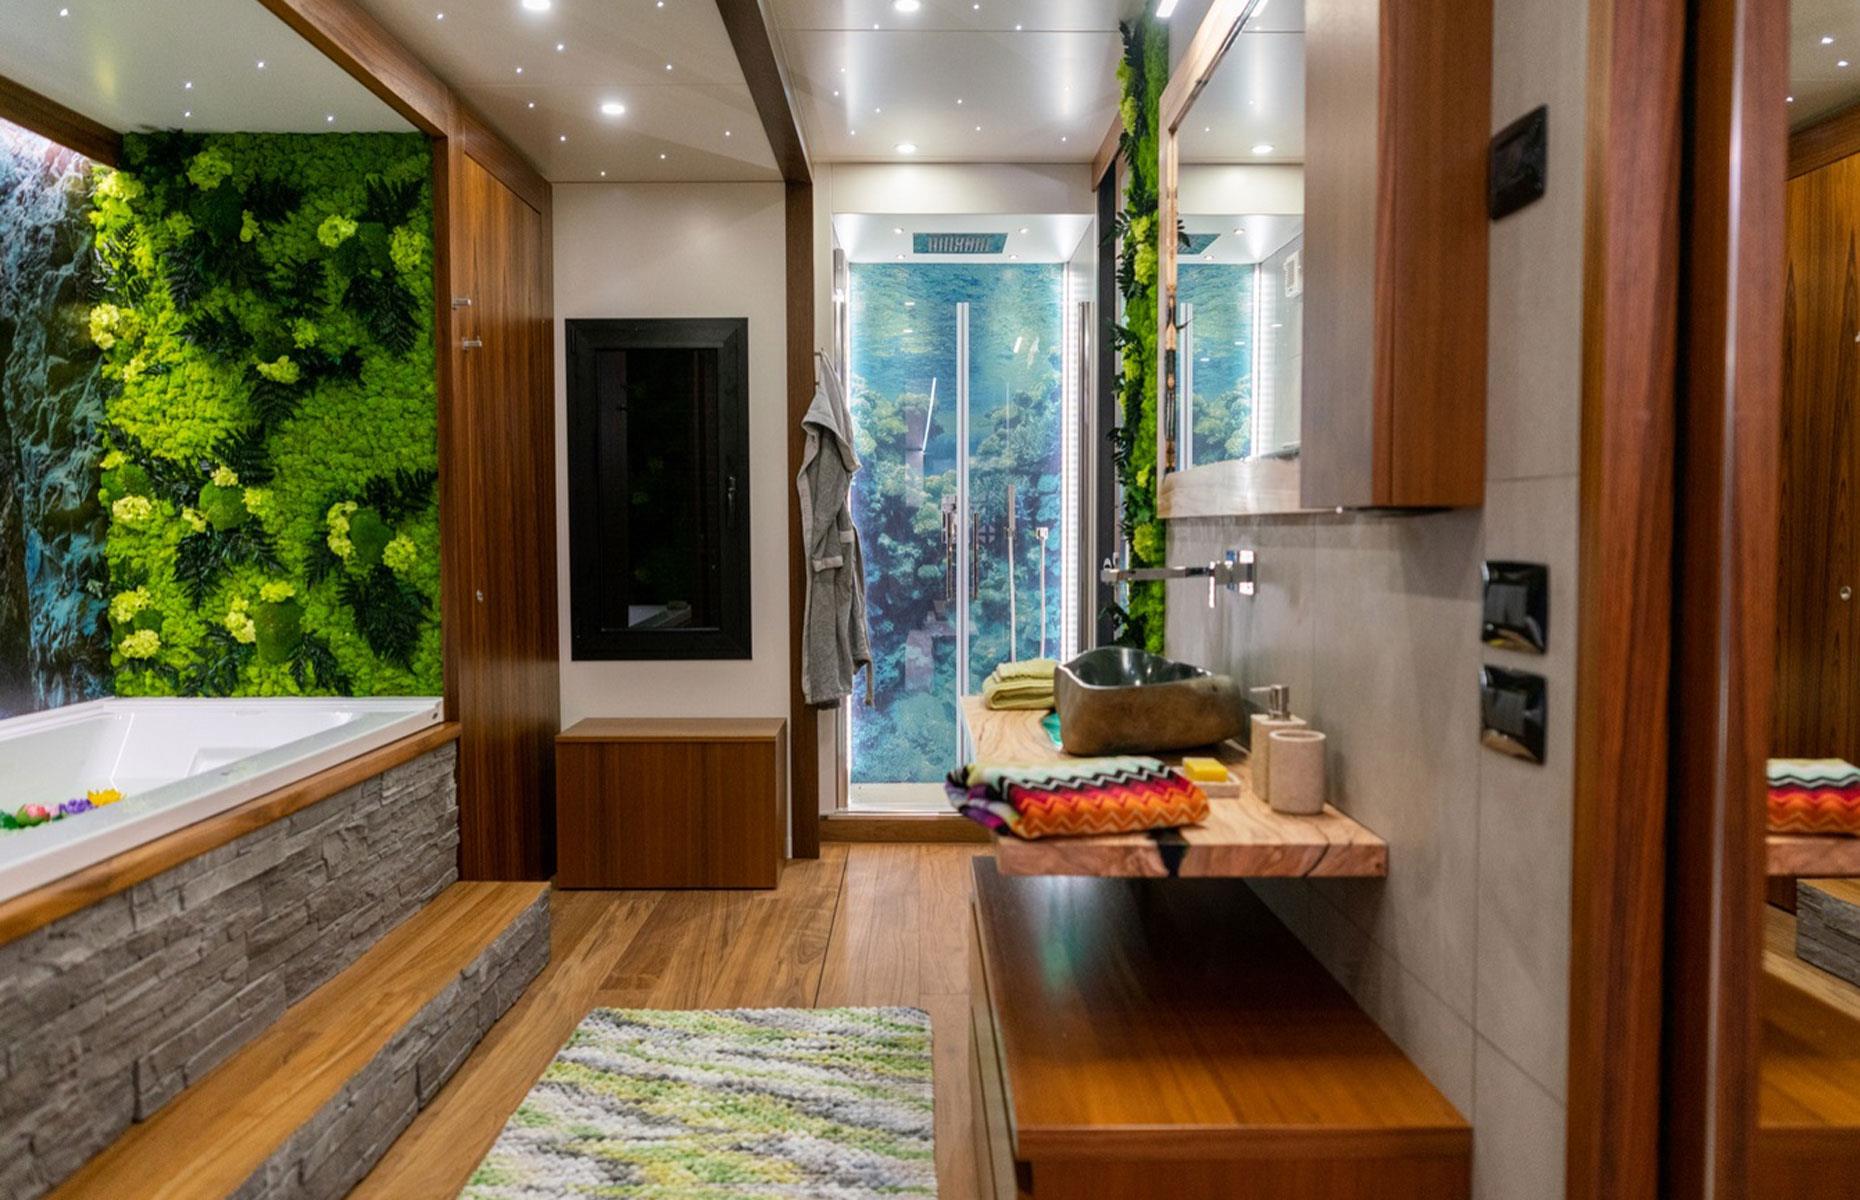 <p>As is the case with only a select few extra-large motorhomes, CMC Caravan has two regular-sized bathrooms, including one spa-like haven that houses a bathtub, which is an incredibly rare sight in an RV.</p>  <p>While CMC Caravan's 61-foot models may seem gargantuan, the biggest RV in history measured an even bigger 65 feet. Built in the 1950s by the Mid-States Corporation, the articulated <a href="https://www.hemmings.com/stories/2021/05/03/quick-question-what-ever-happened-to-the-executive-flagship-mega-cruiser">Executive Flagship mega-cruiser</a> rocked a sun deck, storage for an inflatable swimming pool and other extraordinary amenities.</p>  <p><strong>Now read <a href="https://www.loveexploring.com/news/131025/the-amazing-history-of-rving-in-america">the amazing history of the RV in America</a></strong></p>